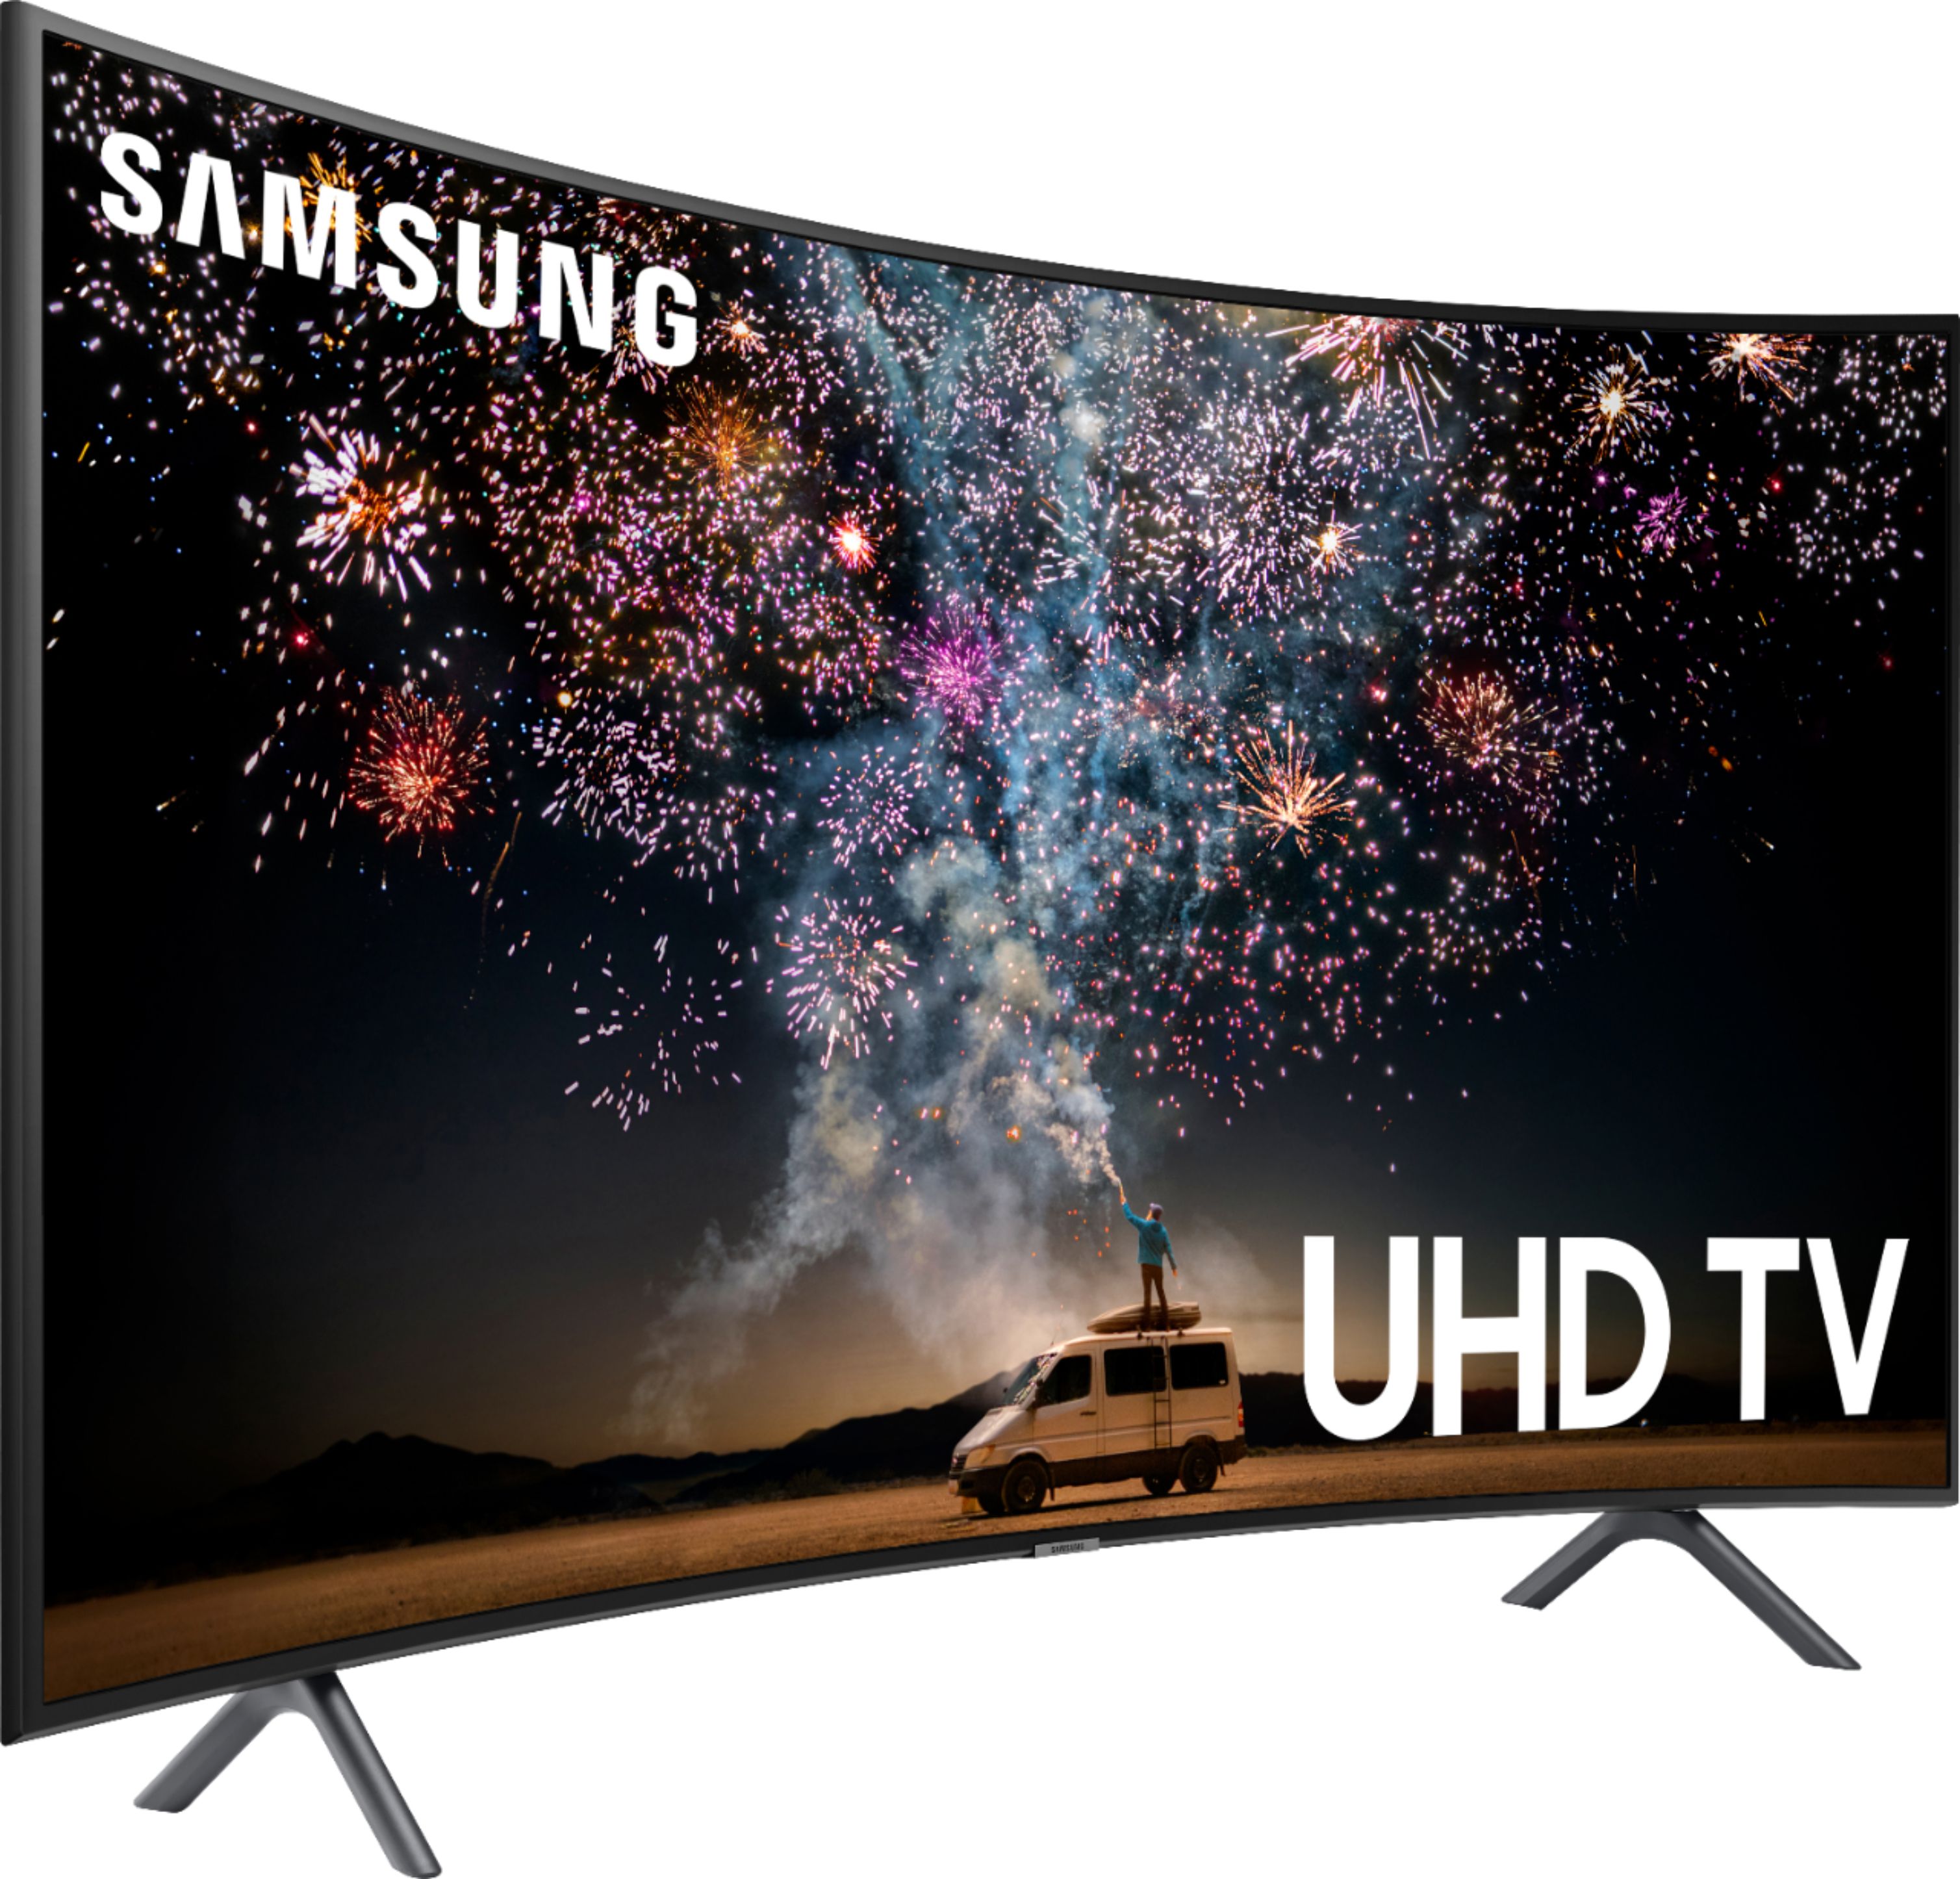 Angle View: Samsung - 65" Class 7 Series Curved LED 4K UHD Smart Tizen TV